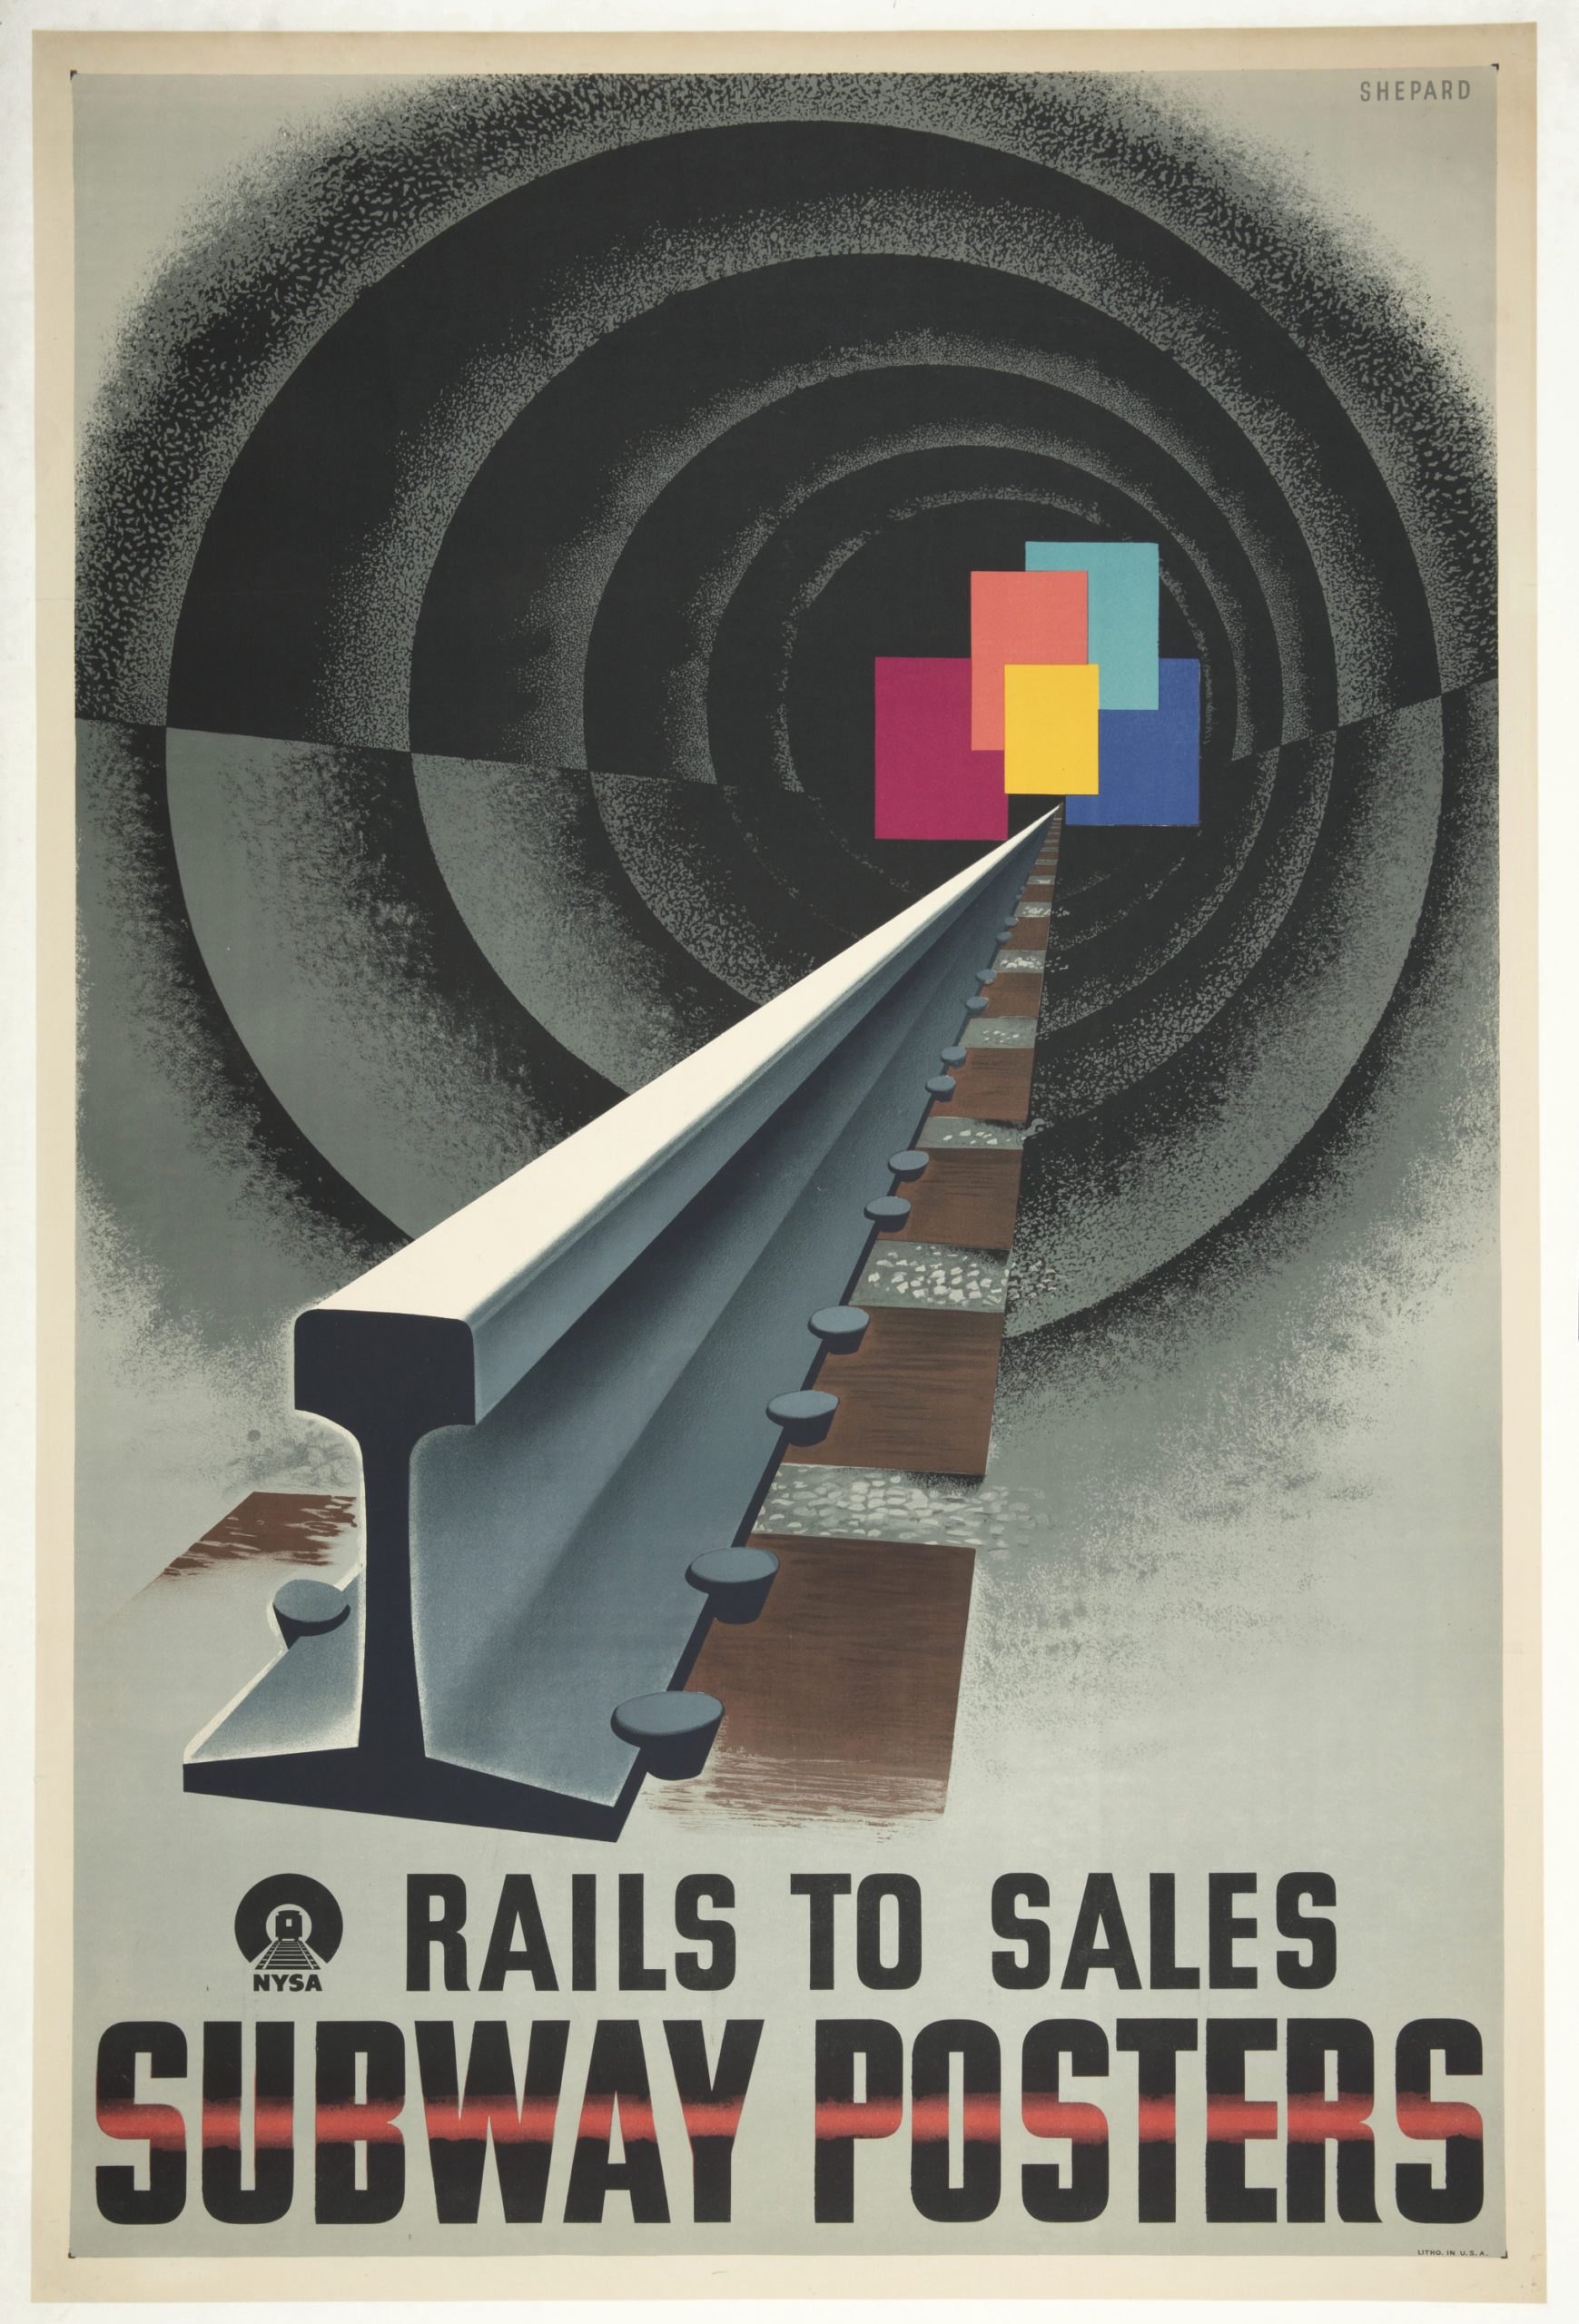 Image features a poster for the New York Subway Advertising Company, encouraging businesses to purchase advertising space in subway stations or on trains. In the foreground, at bottom left, a single train's rail, rendered in perspective extends into a black, spiraling tunnel. At the vanishing point of the tunnel, a cluster of colorful, overlapping rectangles, meant to represent posters. Across the bottom, in black text: [New York Subway Advertising Company logo] RAILS TO SALES / SUBWAY POSTERS [a red line cuts through the center of "subway posters"]. Please scroll down to read the blog post about this object.